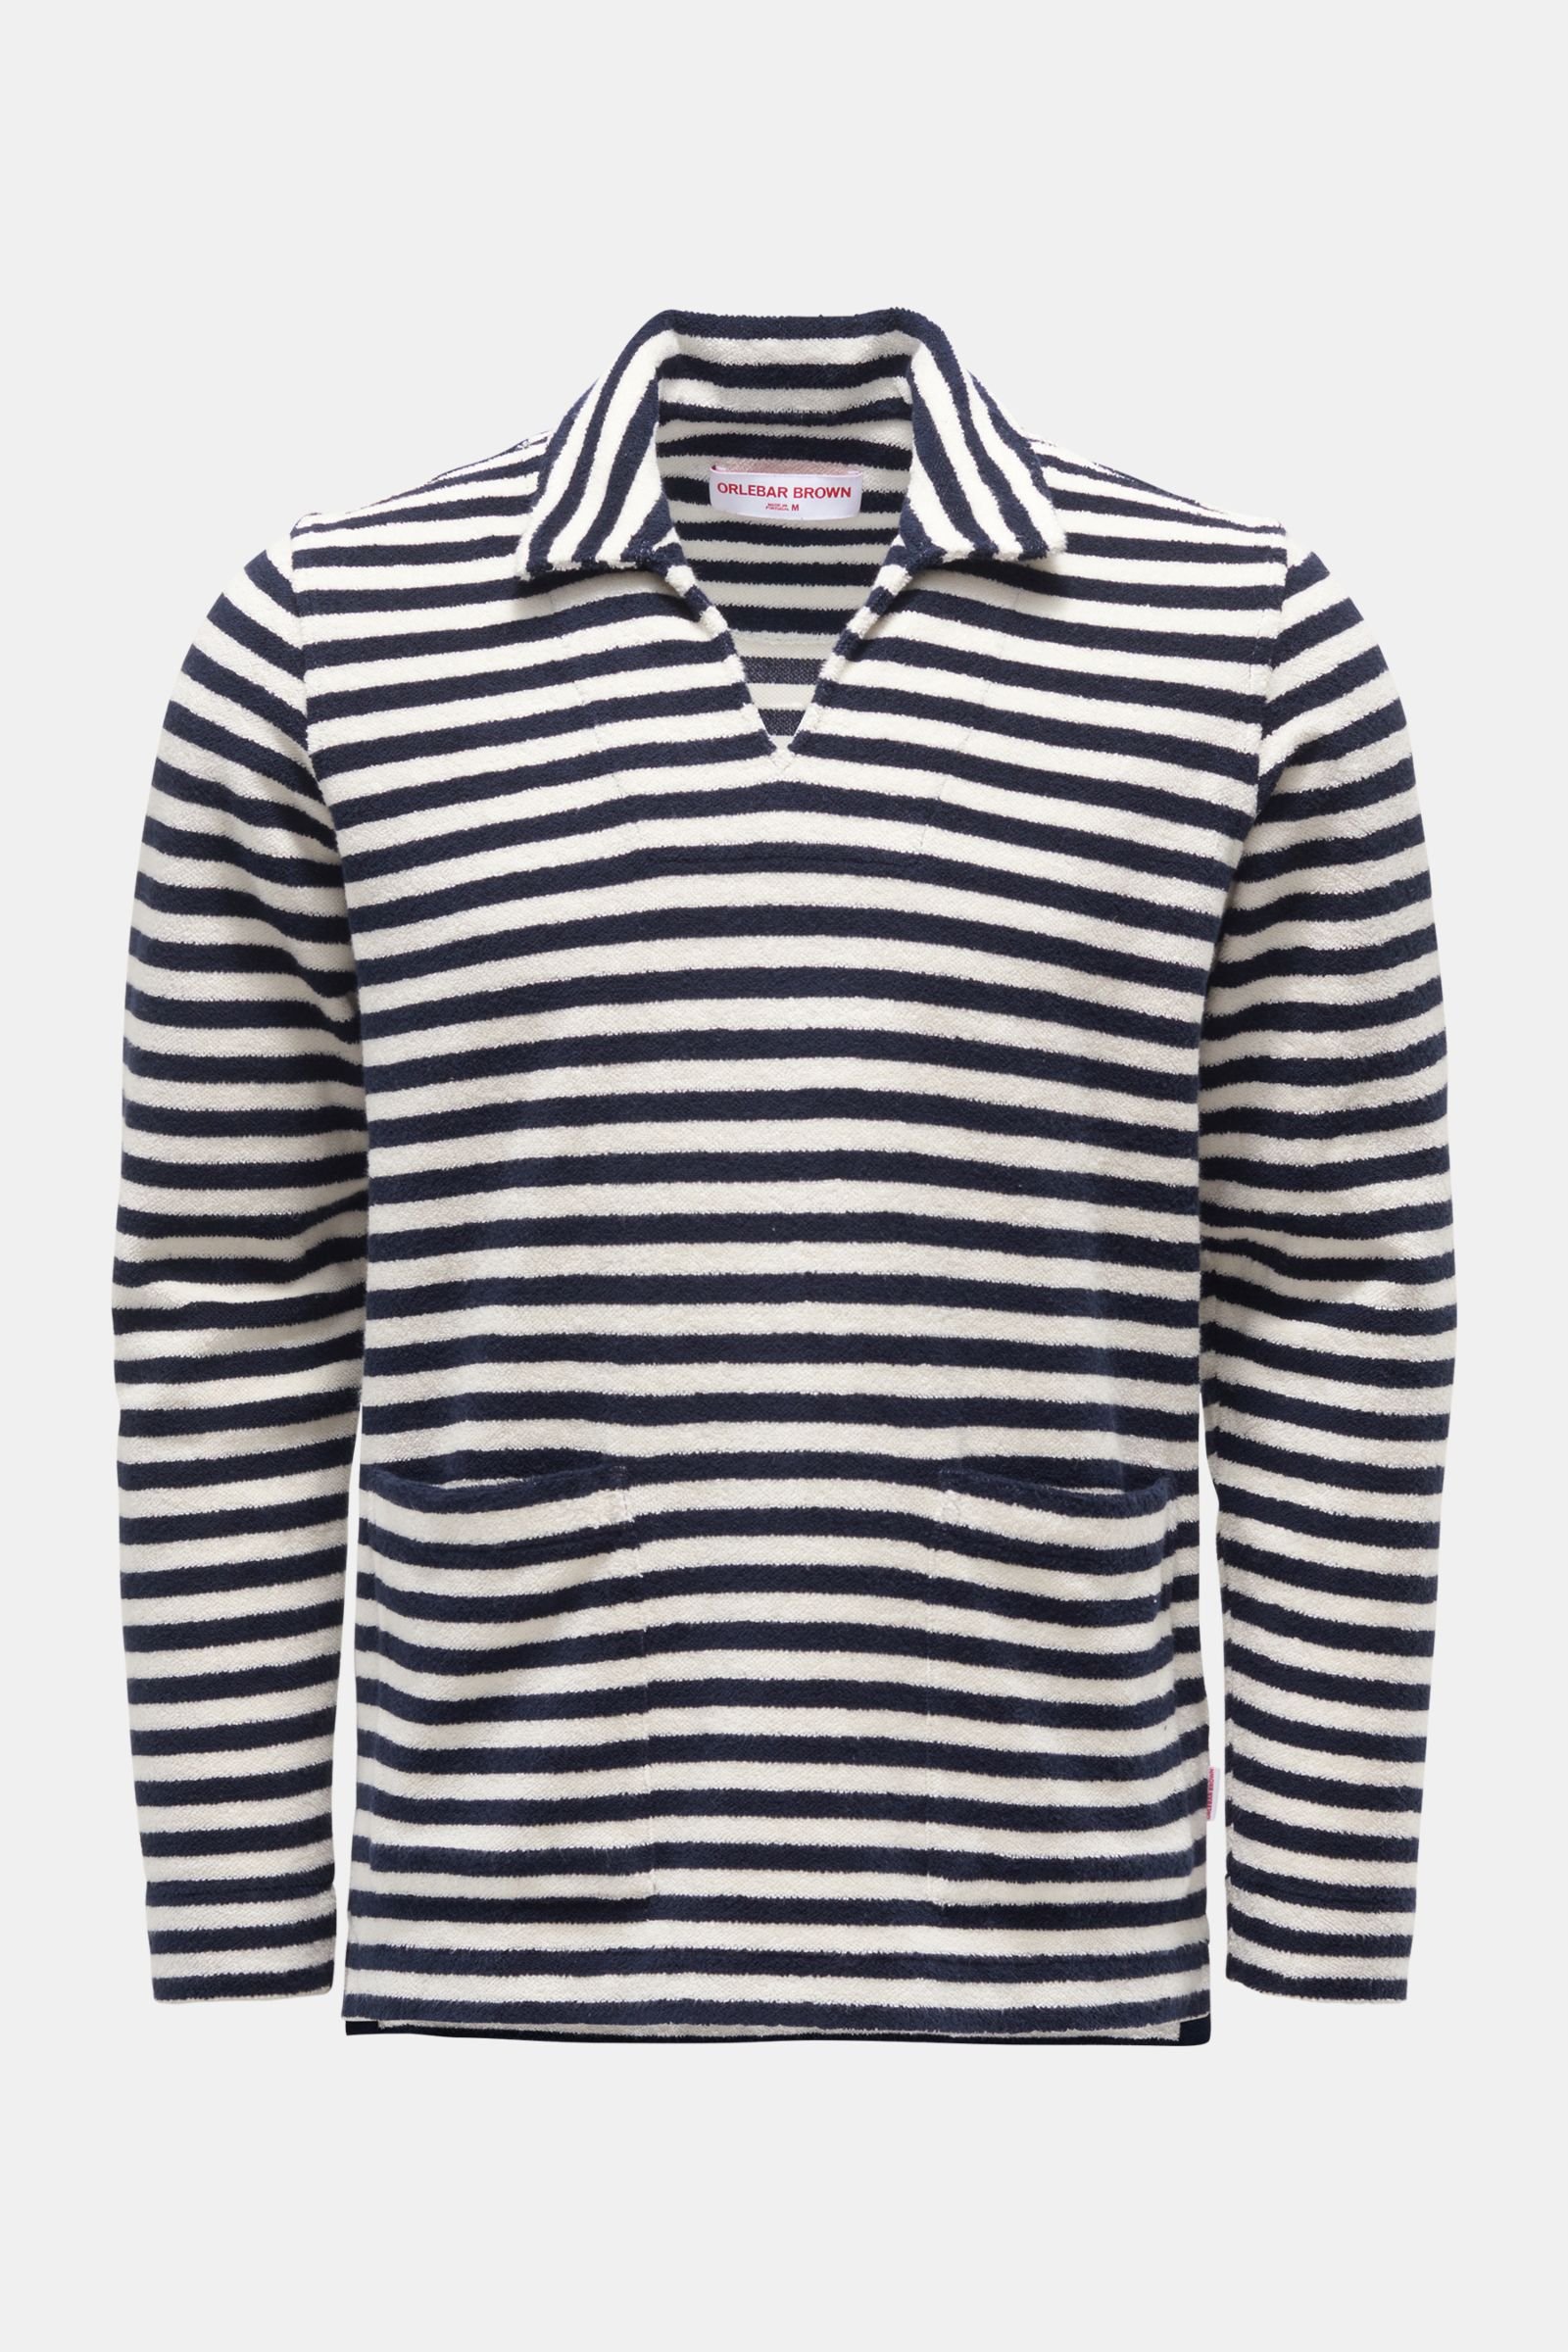 Terry long sleeve polo shirt 'Lincoln' navy/white striped